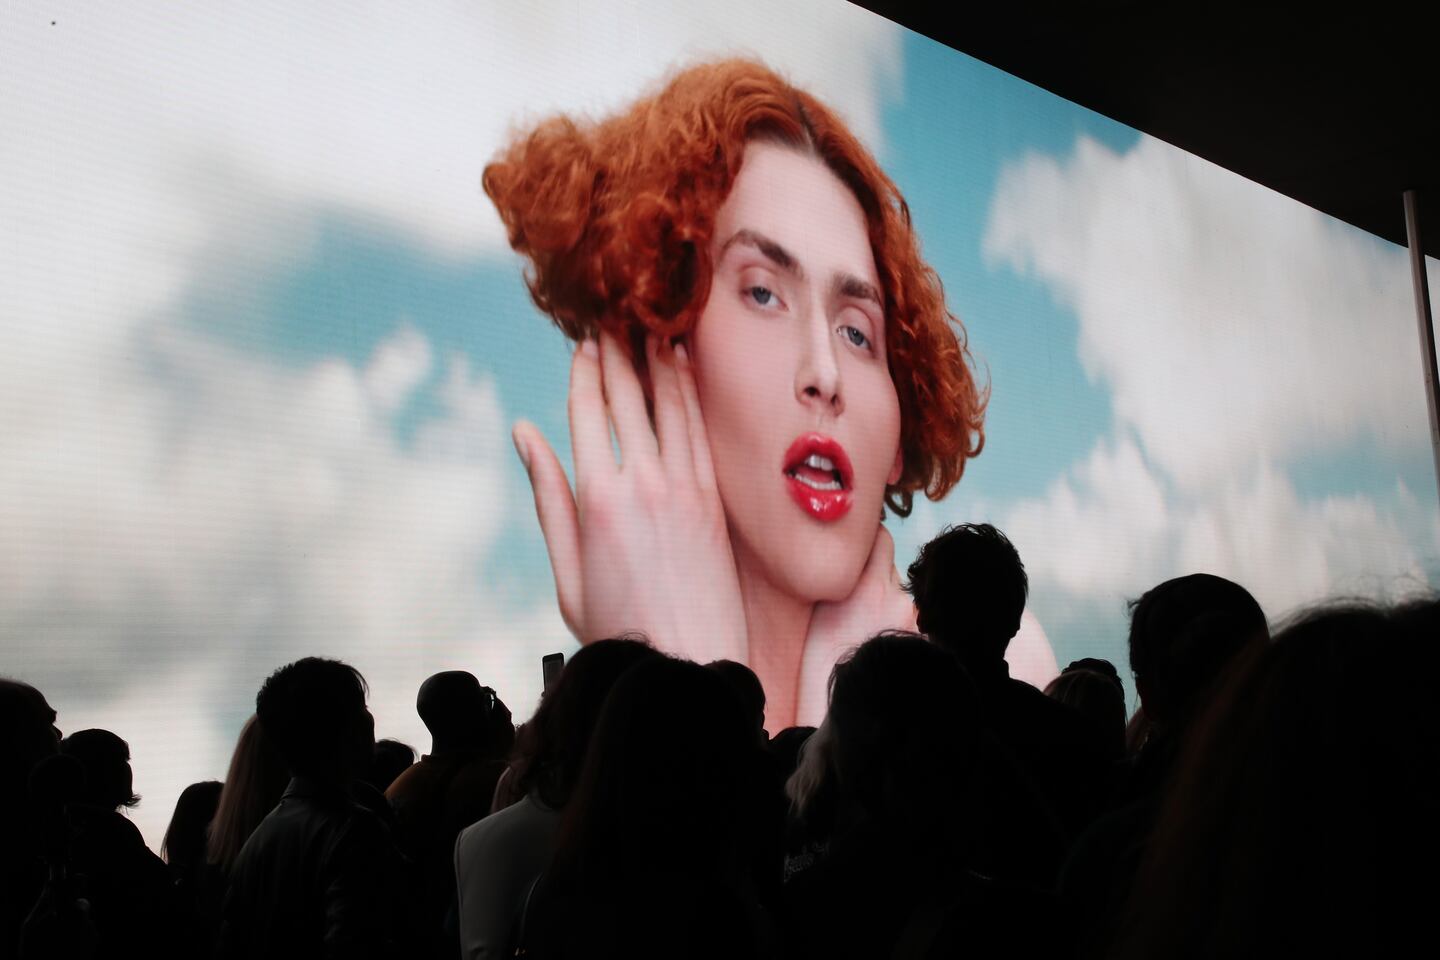 PARIS, FRANCE - OCTOBER 01:  Illustration view of singer of the show Sophie Xeon aka Sophie on the screen during the Louis Vuitton Womenswear Spring/Summer 2020 show as part of Paris Fashion Week on October 01, 2019 in Paris, France. (Photo by Bertrand Rindoff Petroff/Getty Images)